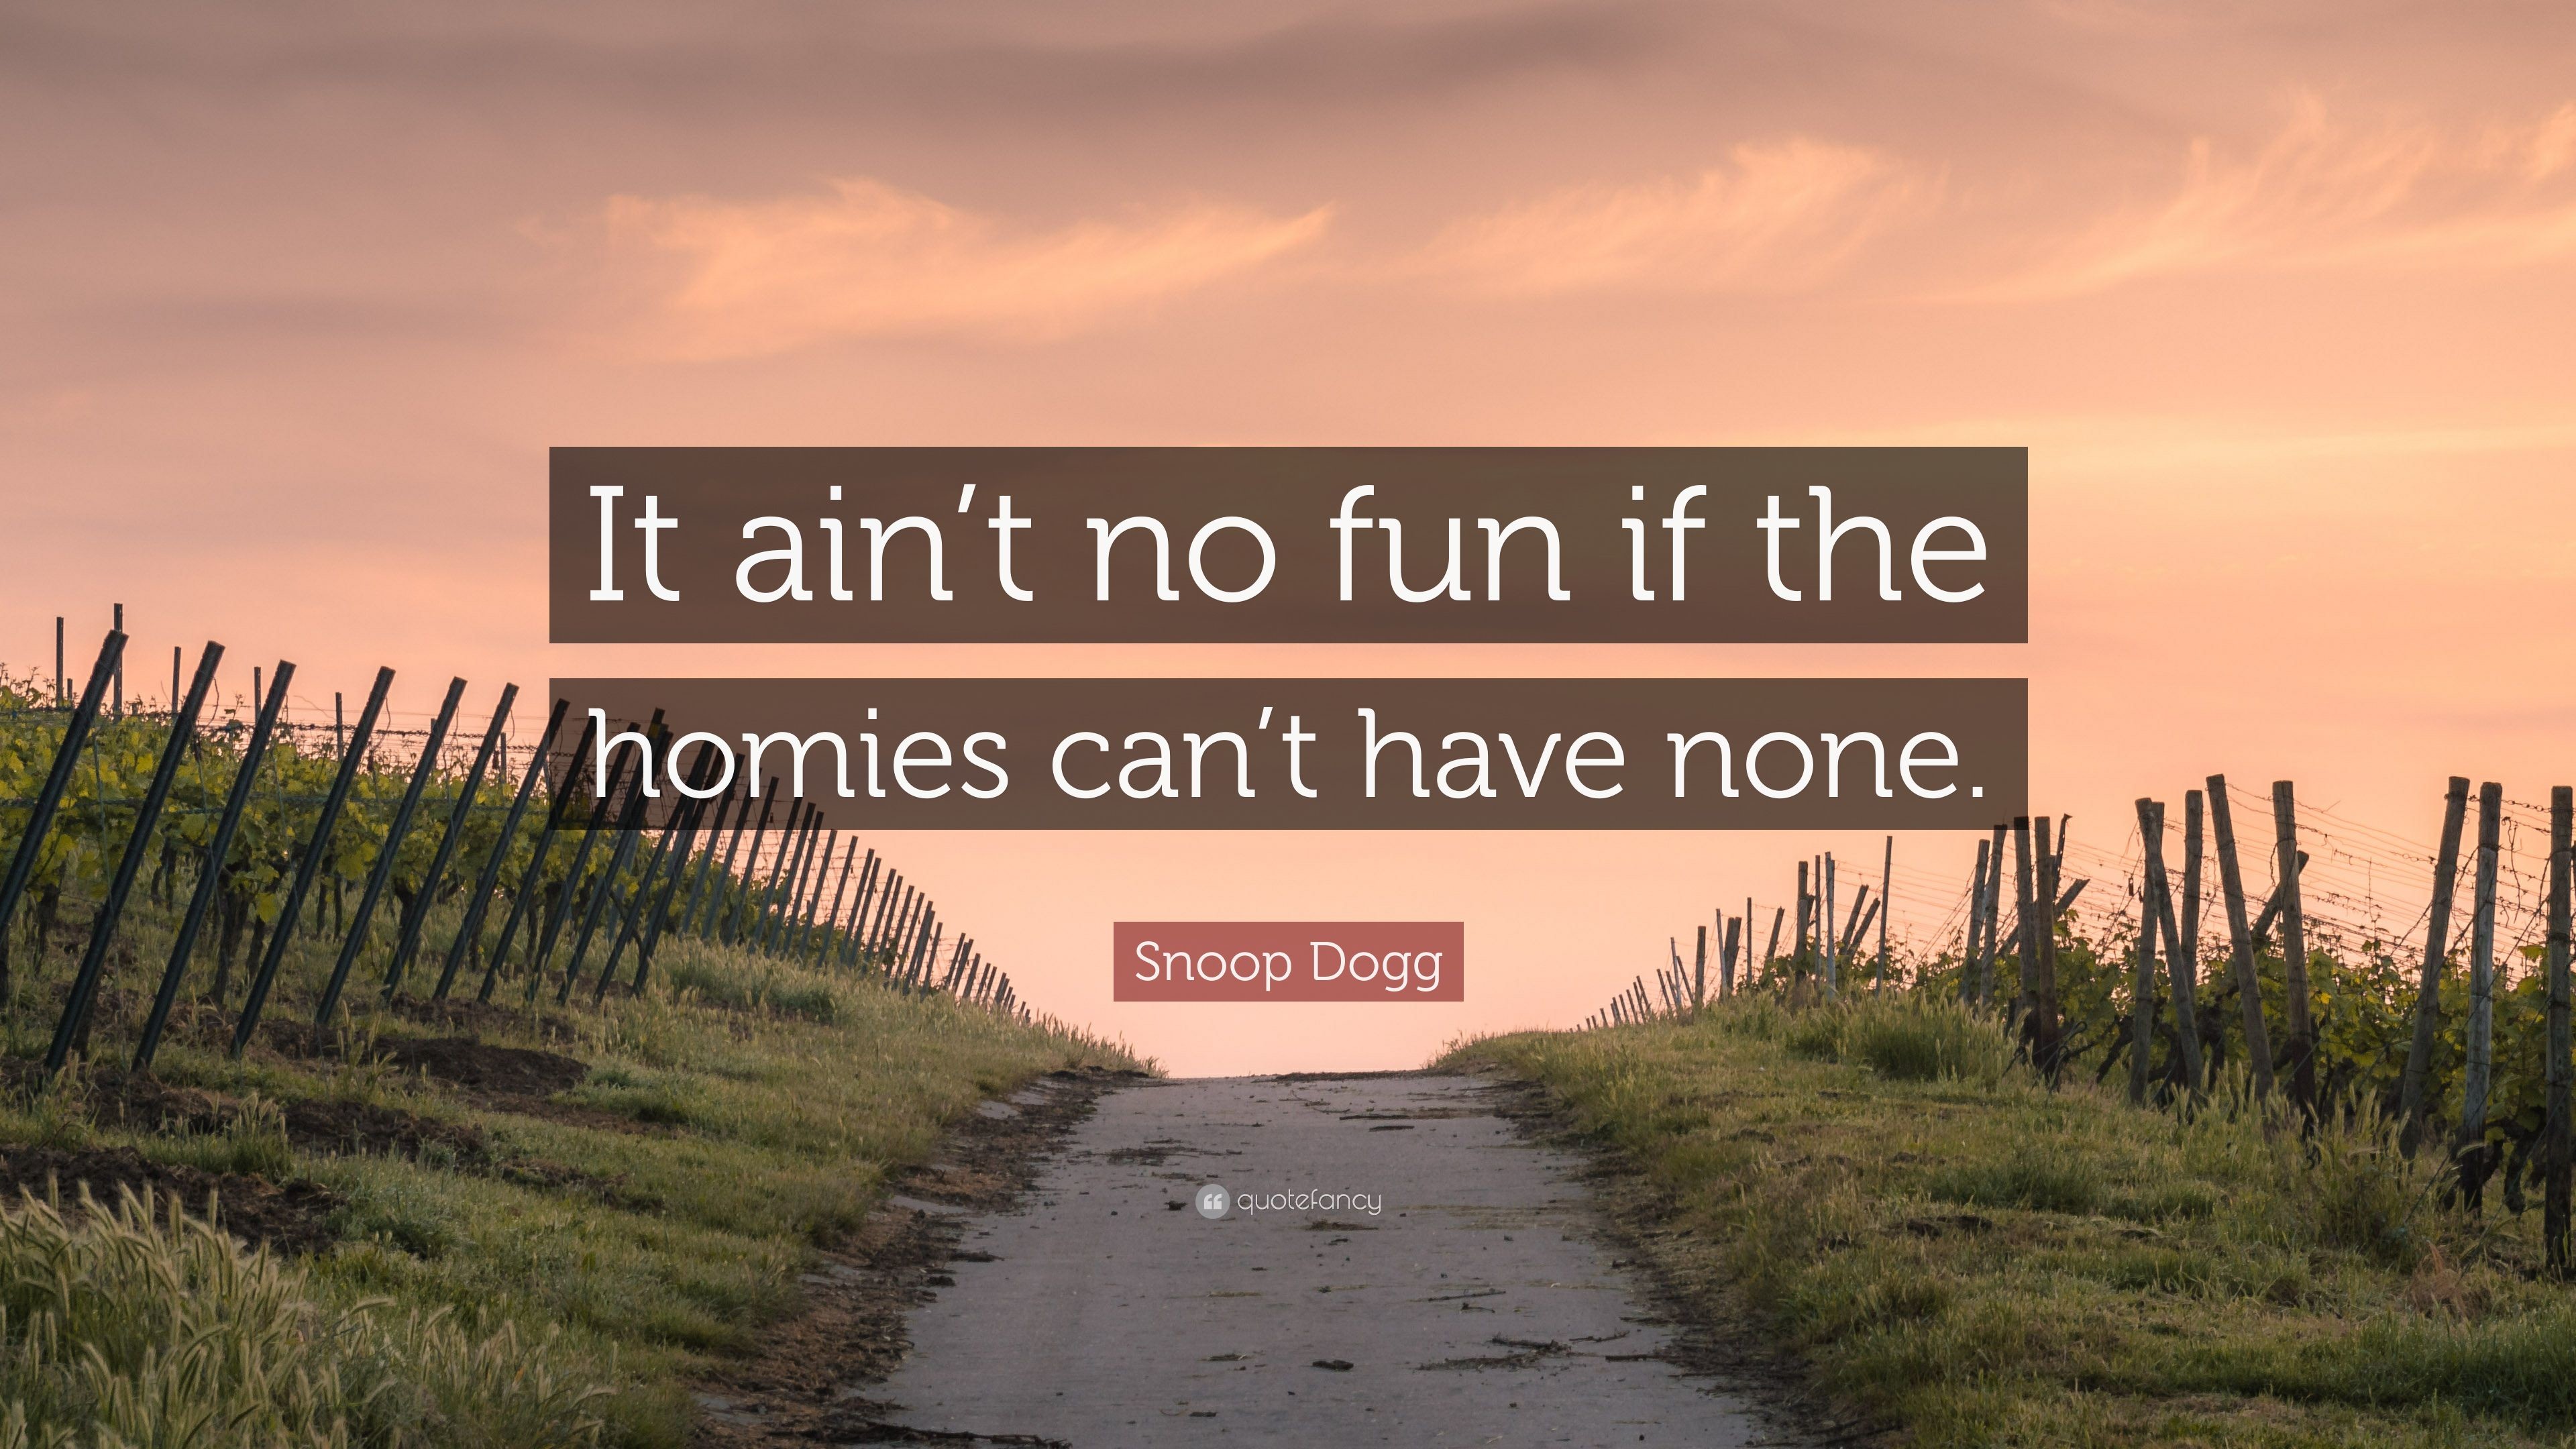 3840x2160 Snoop Dogg Quote: “It ain't no fun if the homies can'